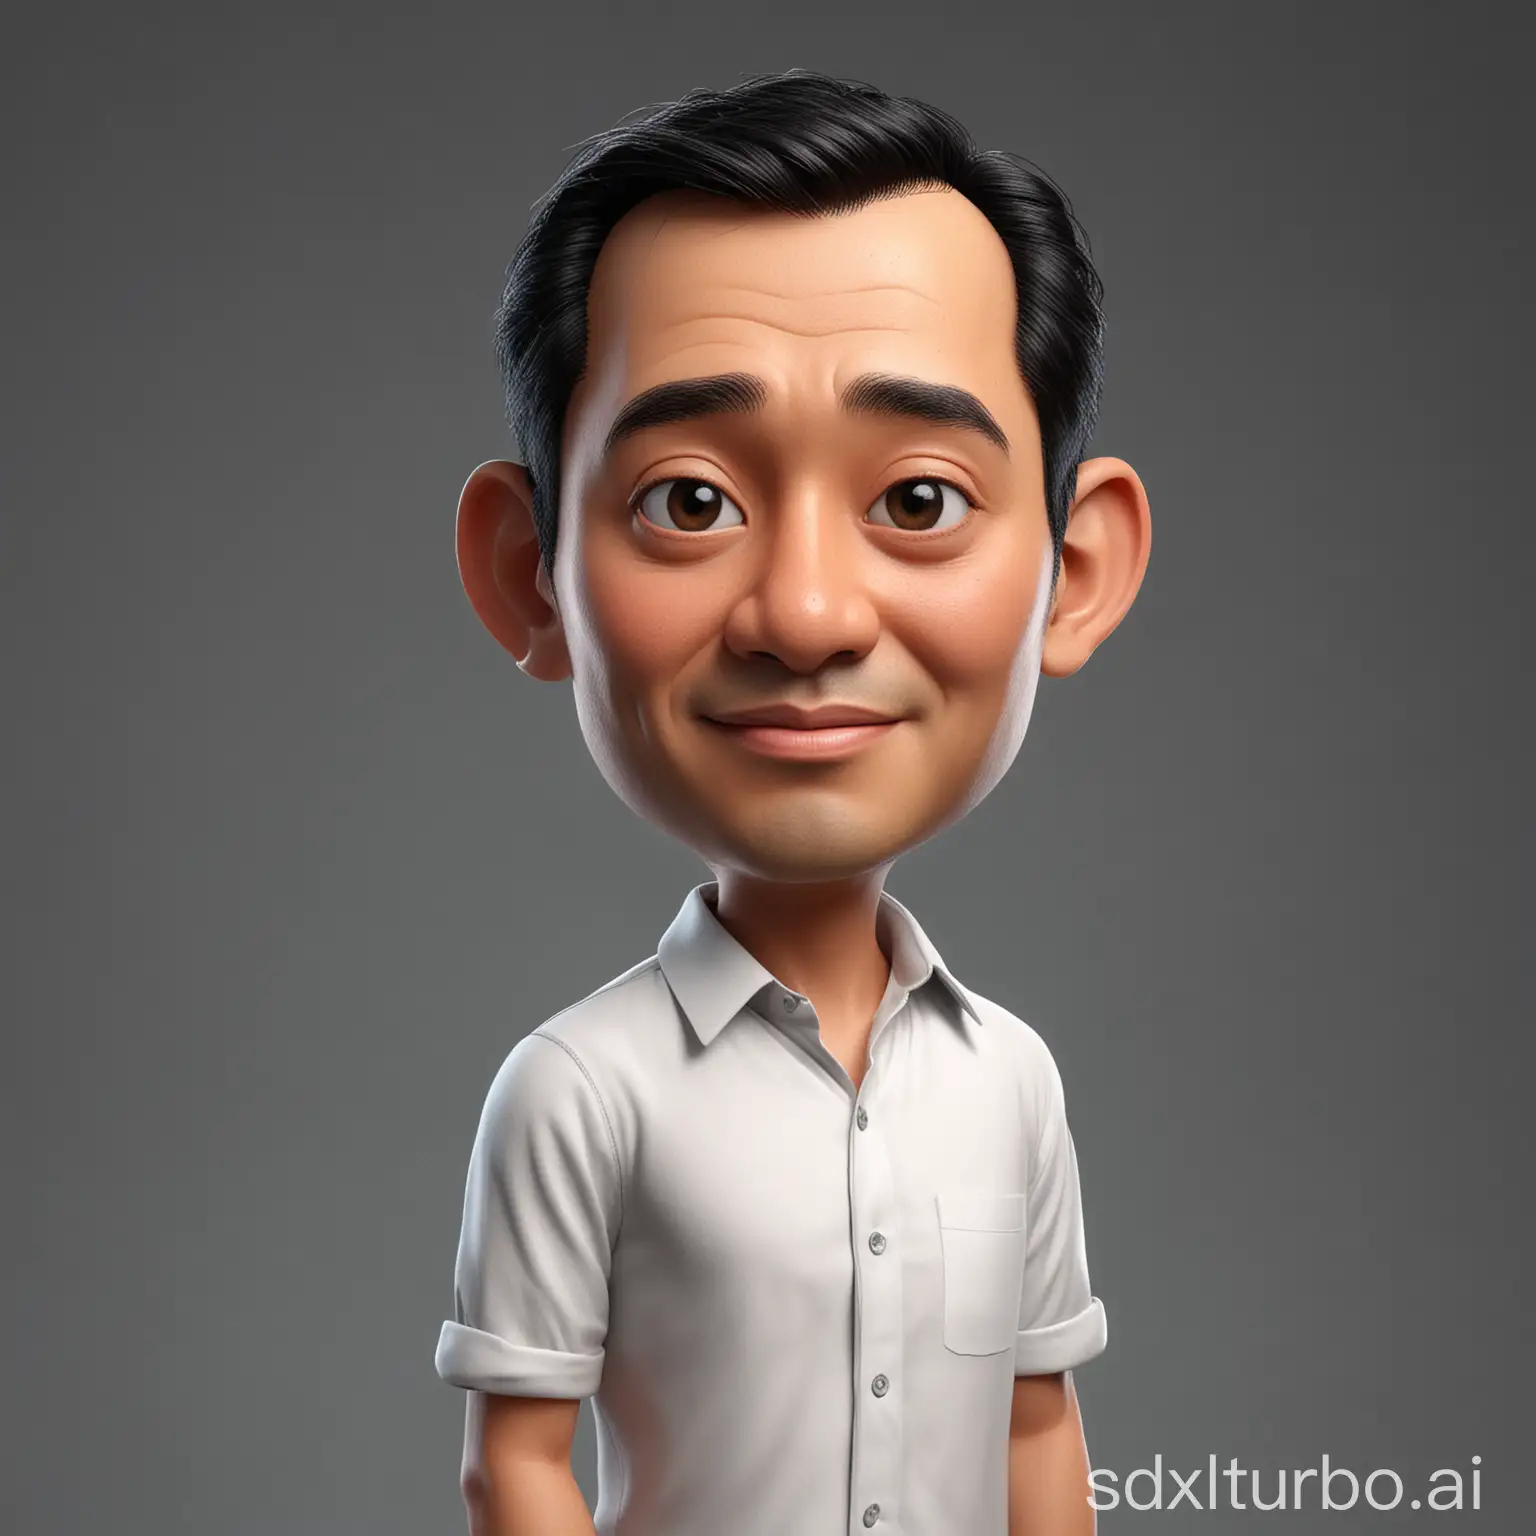 Indonesian-Man-Portrait-in-Cartoon-Style-with-Oval-Face-and-White-Shirt